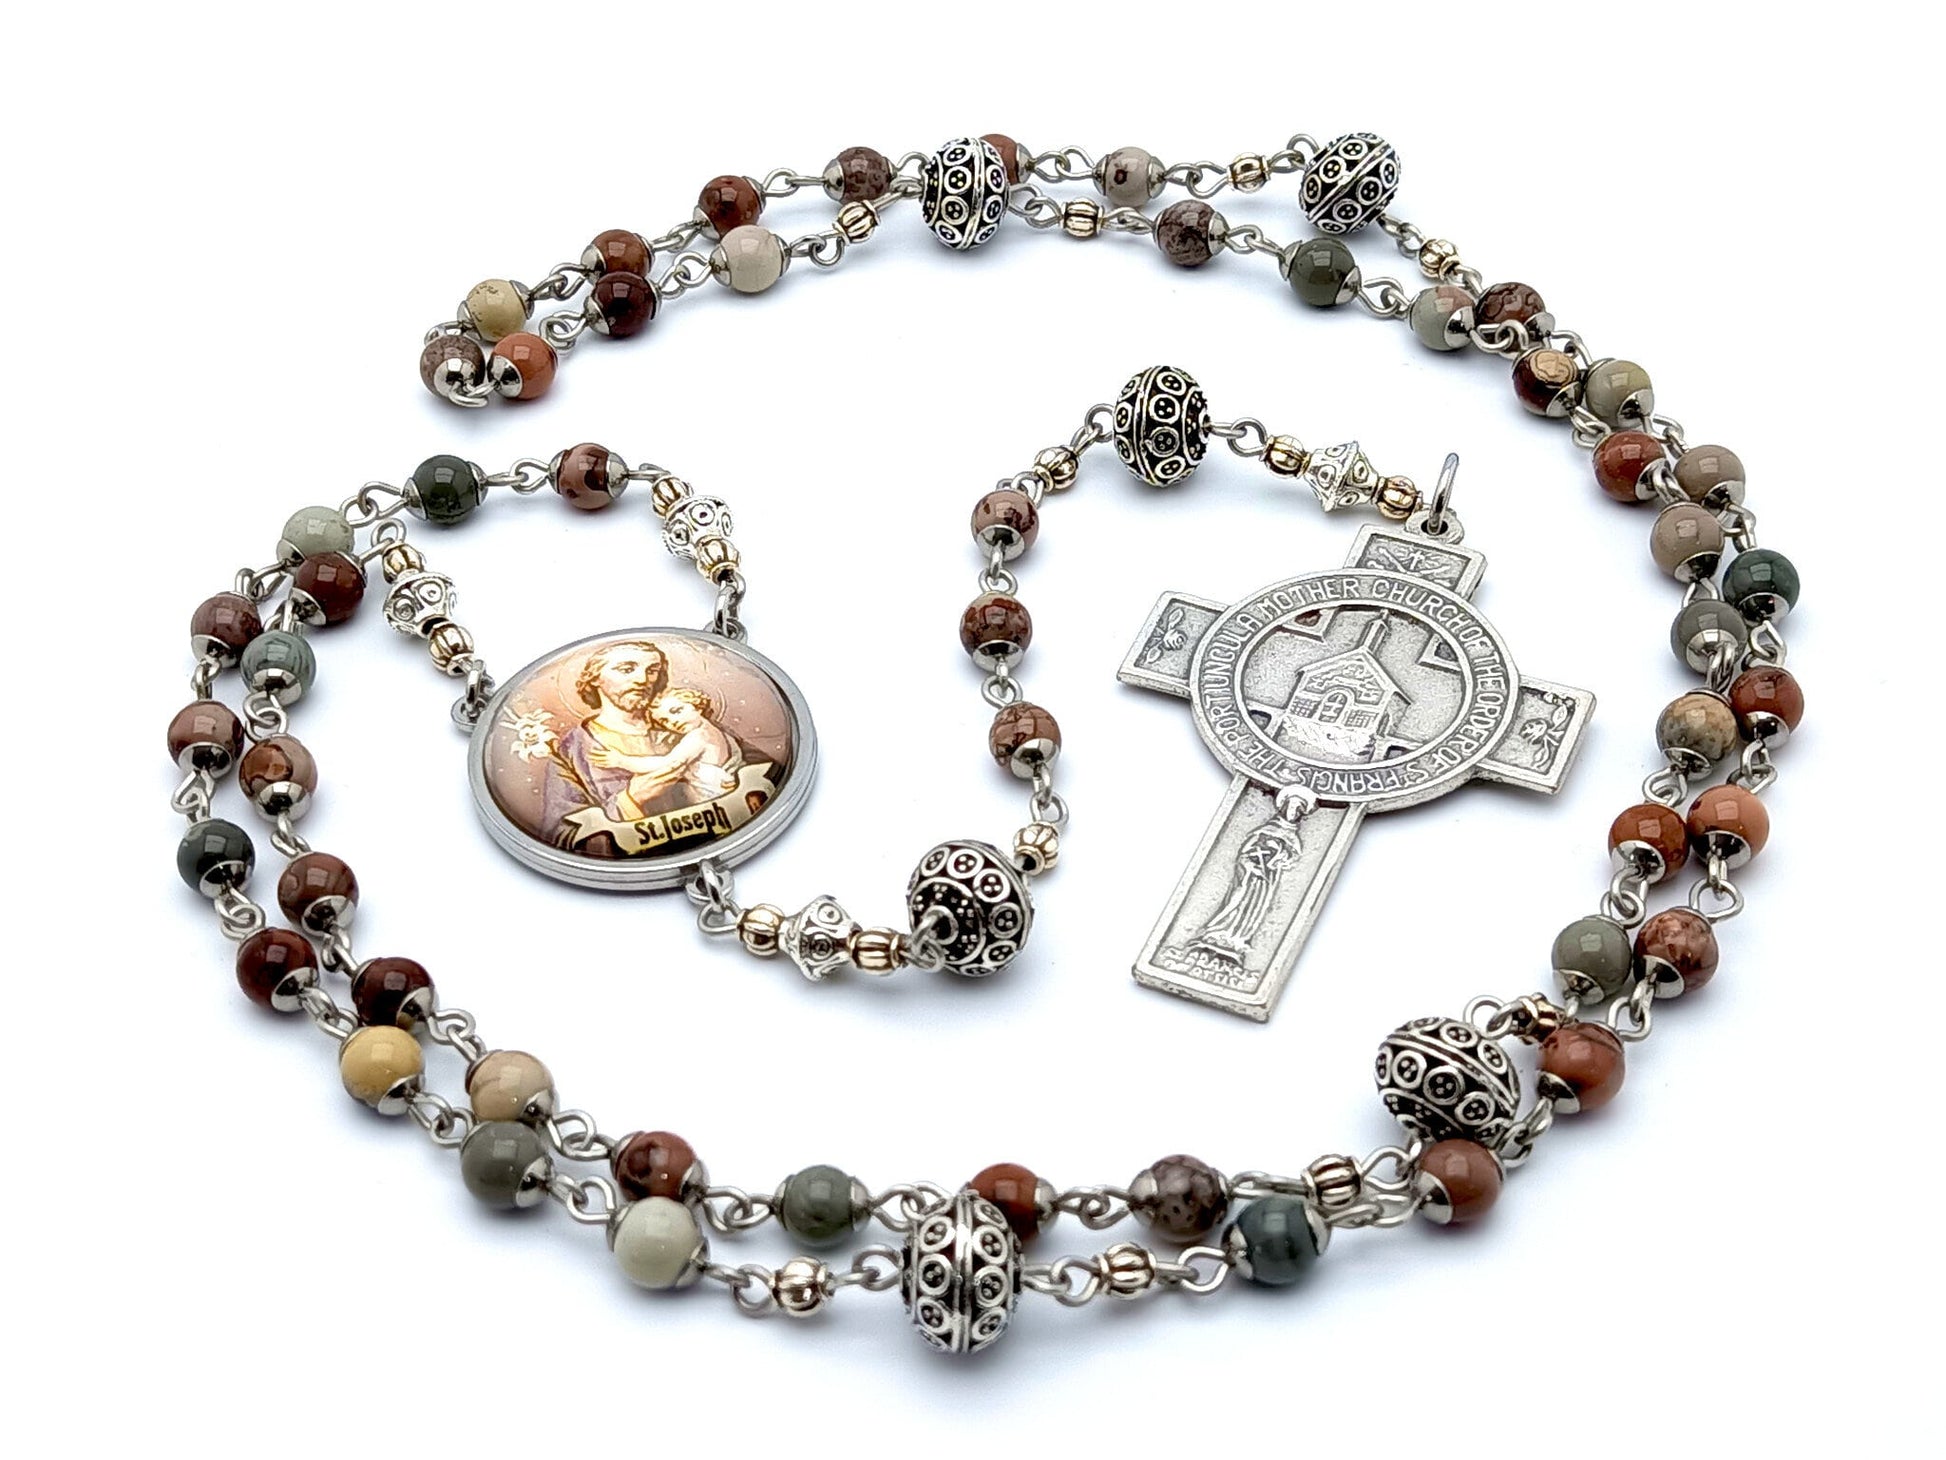 Saint Joseph unique rosary beads with jasper gemstone and silver beads, Portiuncula Assisi cross and picture centre medal.